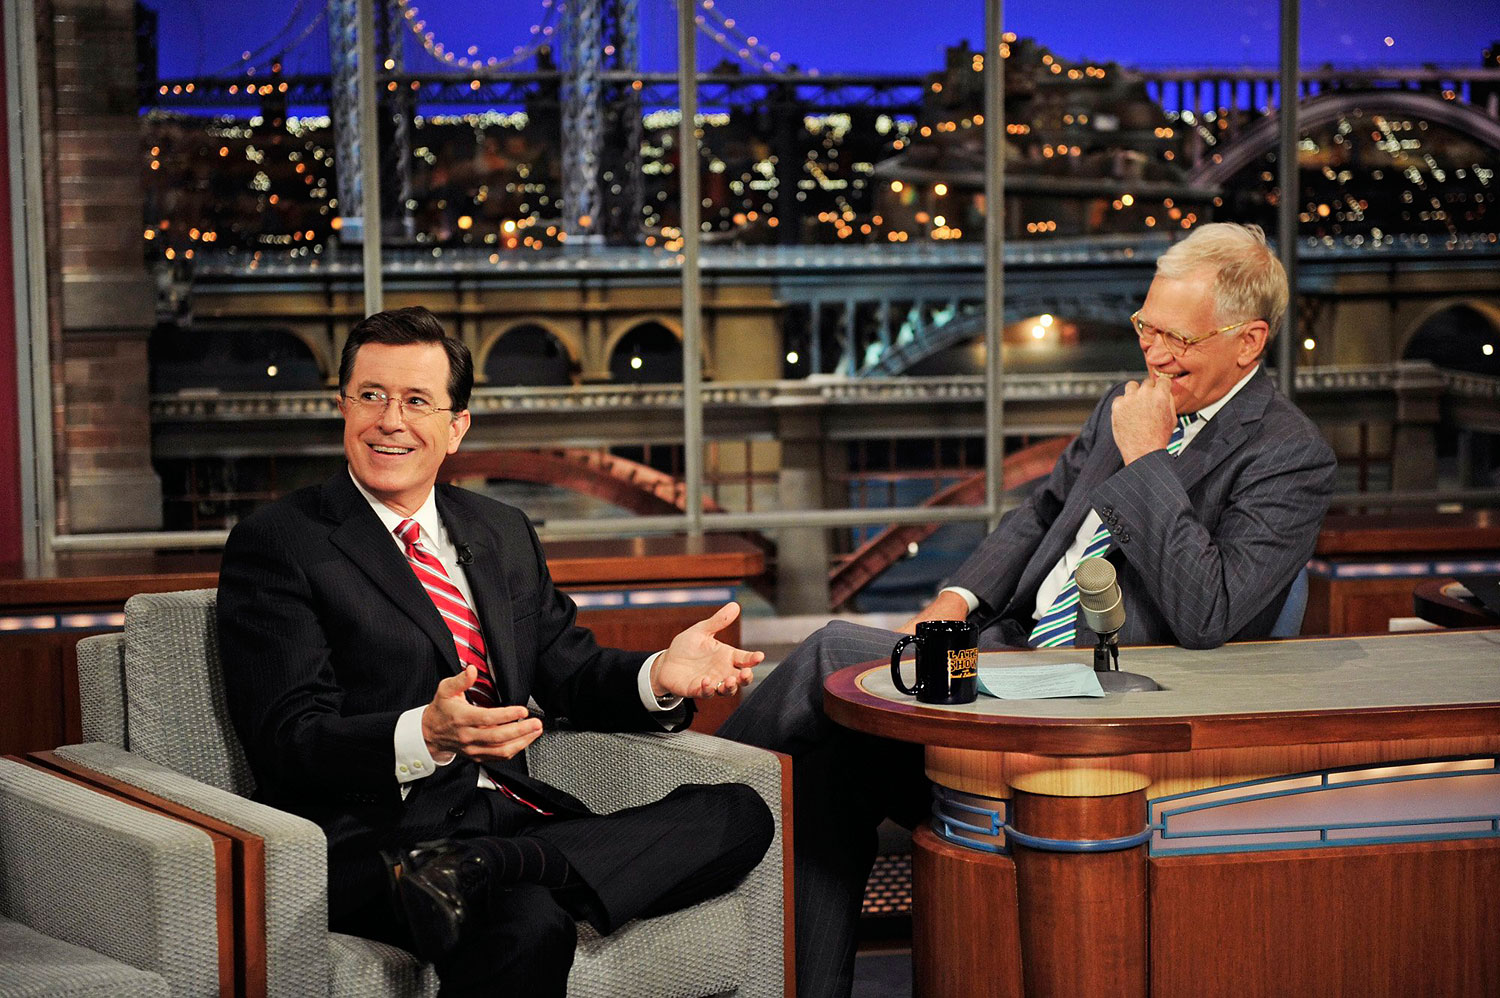 FILE: Stephen Colbert To Replace David Letterman On "Late Show" Late Show with David Letterman